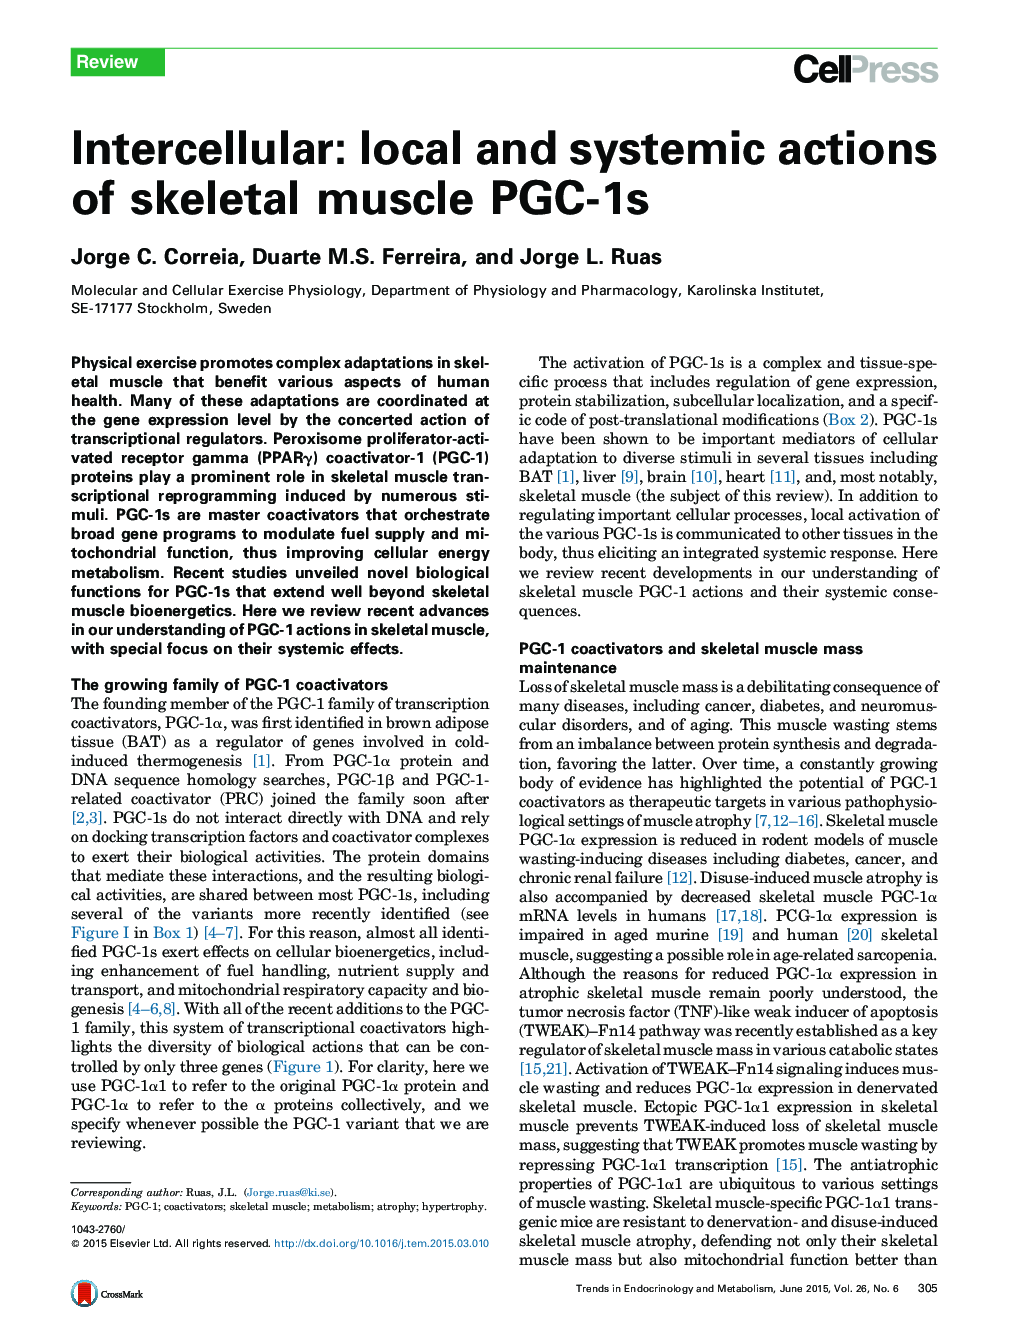 Intercellular: local and systemic actions of skeletal muscle PGC-1s